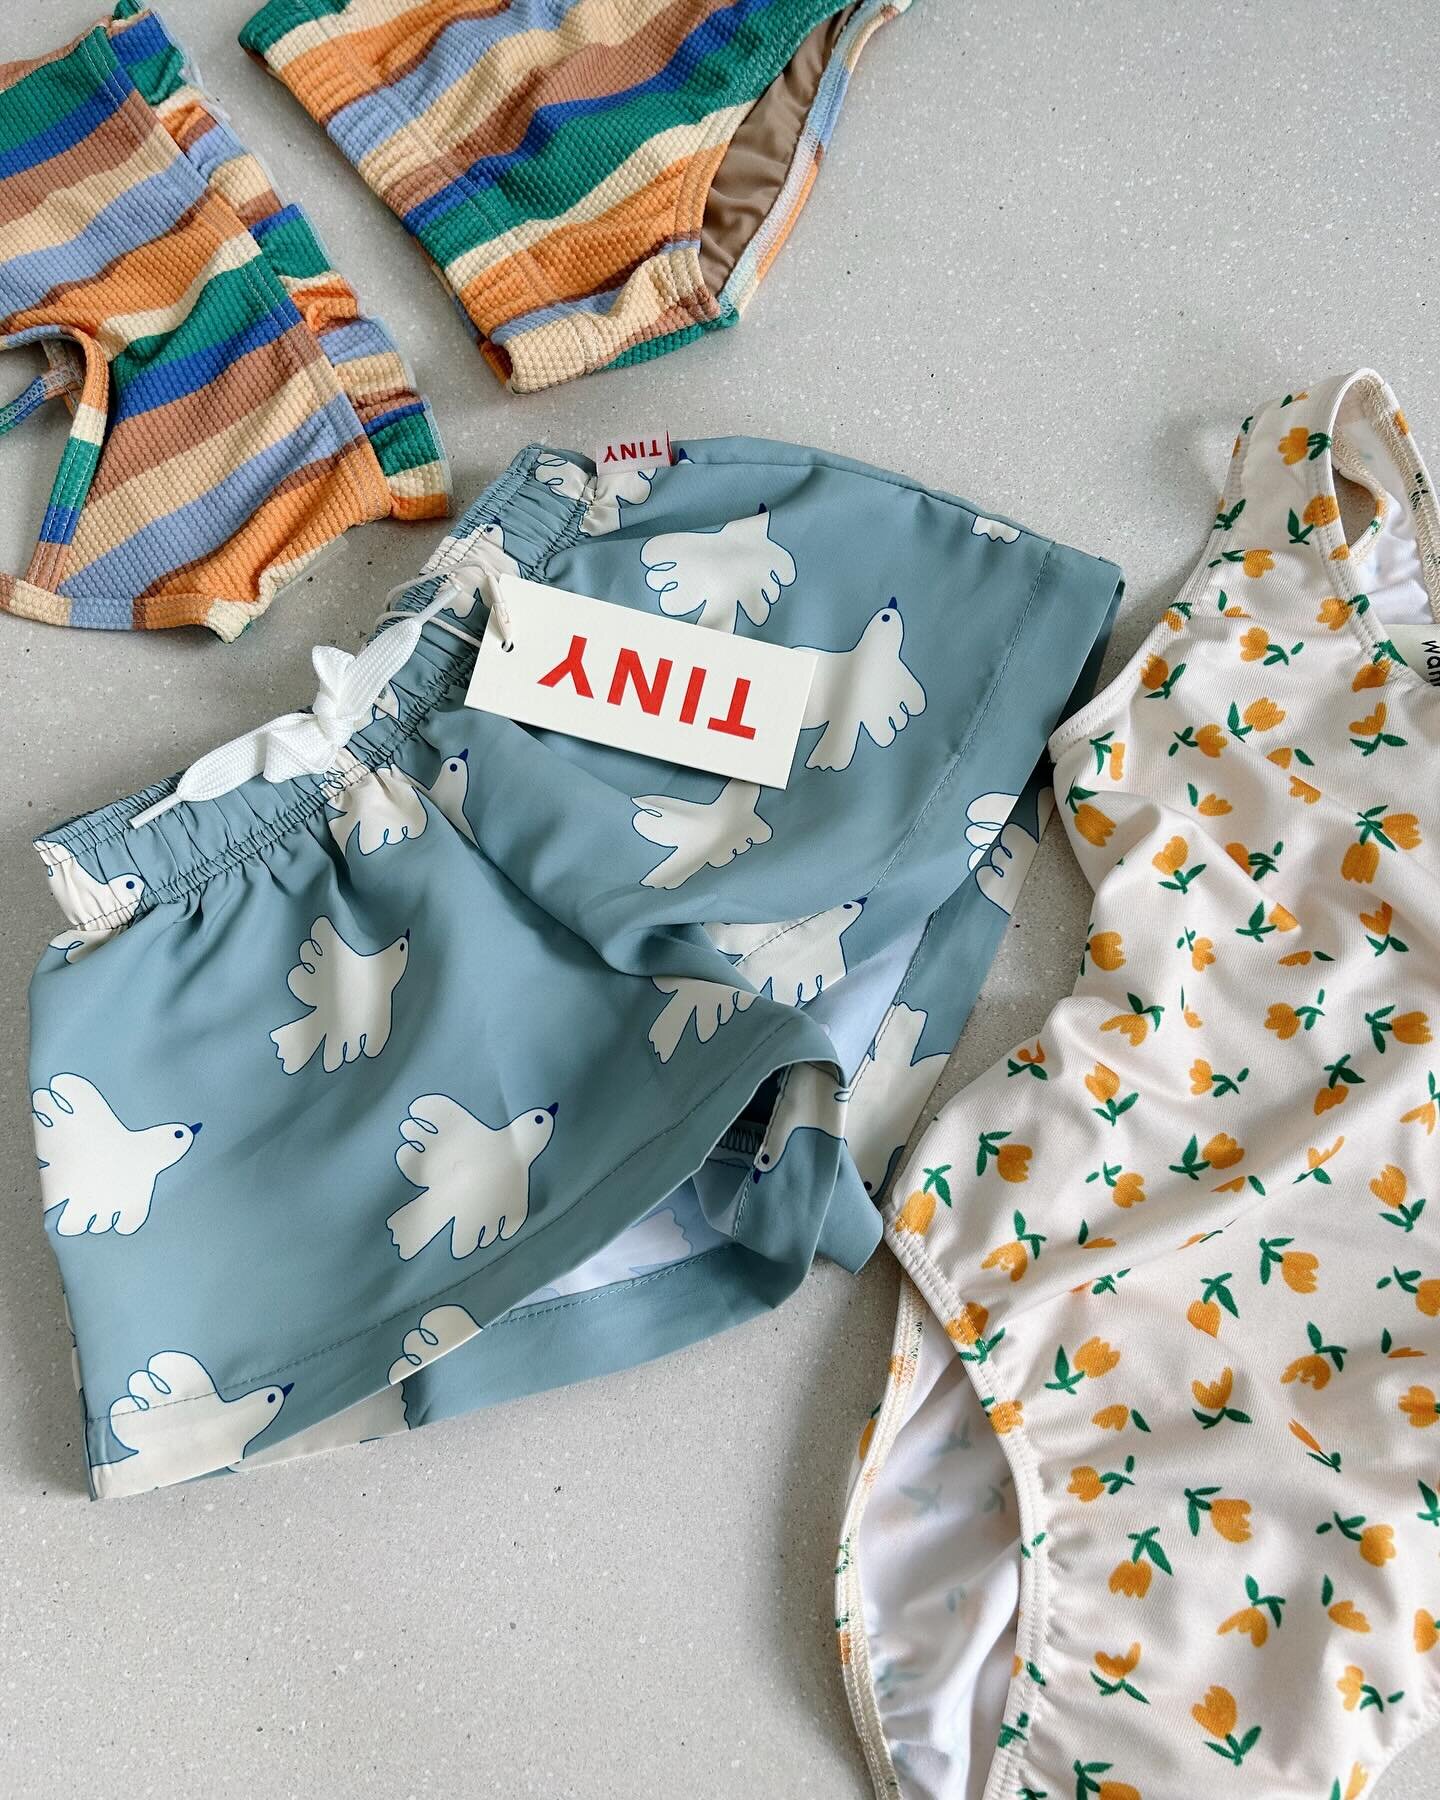 Sunny swimwear is waiting for you all! ☀️💦 

Our favourites by @tinycottons &amp; @wandernwonderkids 🌈🕊️💐

#ottotiptotto #ottoilbassottostore #tinycottons #wandernwonderkids #ss24 #swimwear #kidsfashion #kidsstore #lievegem